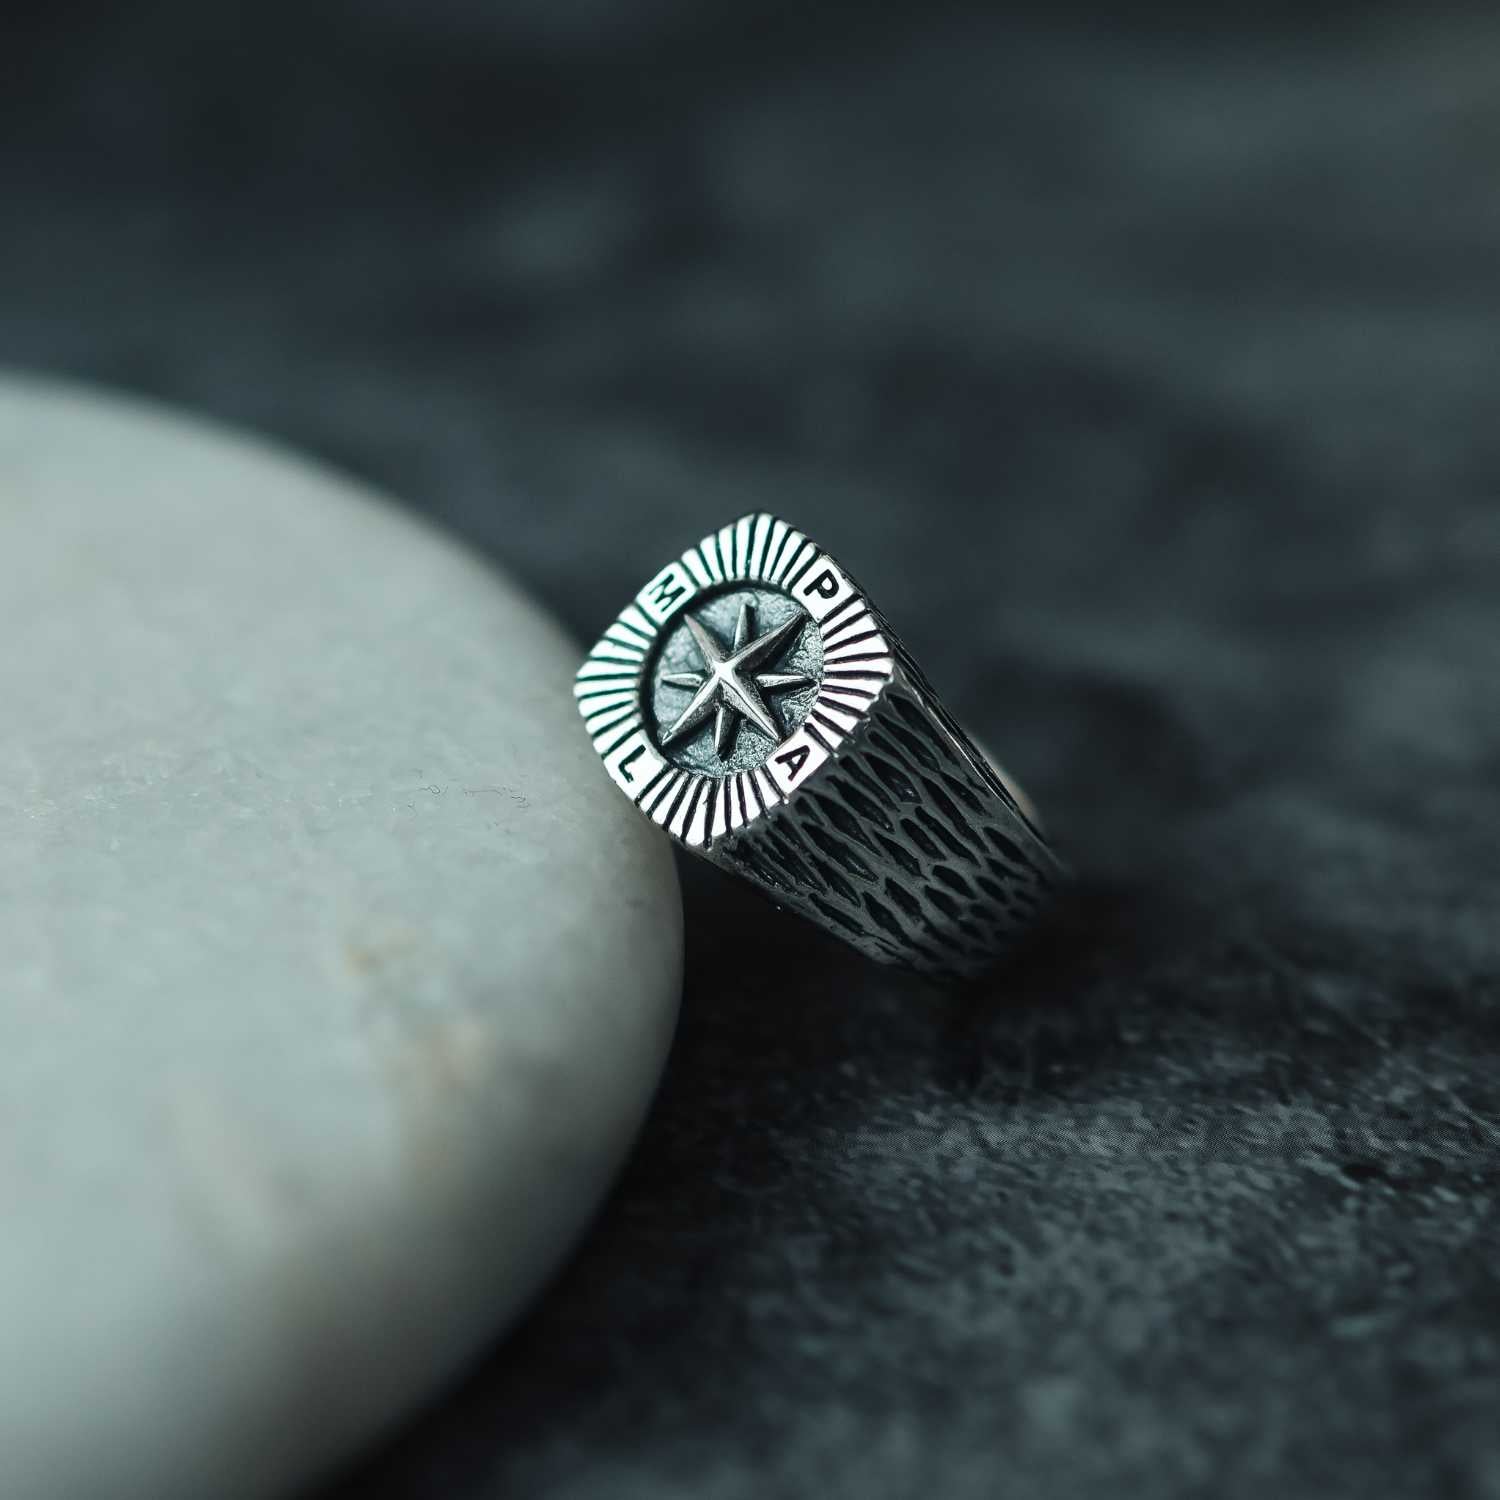 COMPASS RING. - 925 Silver Ring 14mm - PALM. | Handcrafted Jewelry-